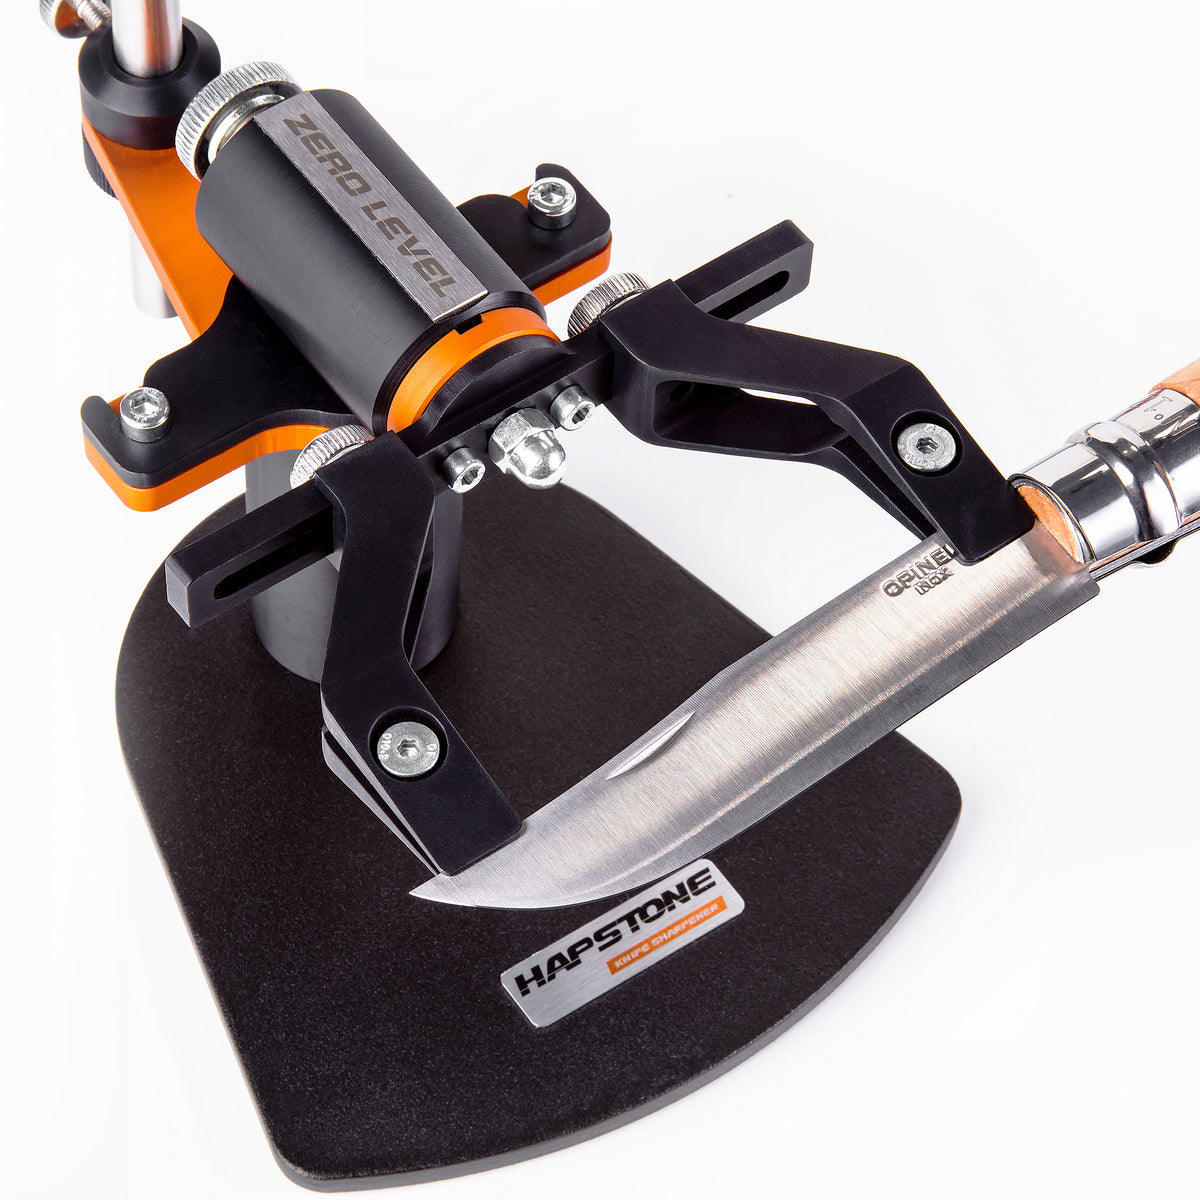 First Impressions of the NEW Hapstone K1 Knife Sharpener Rotating